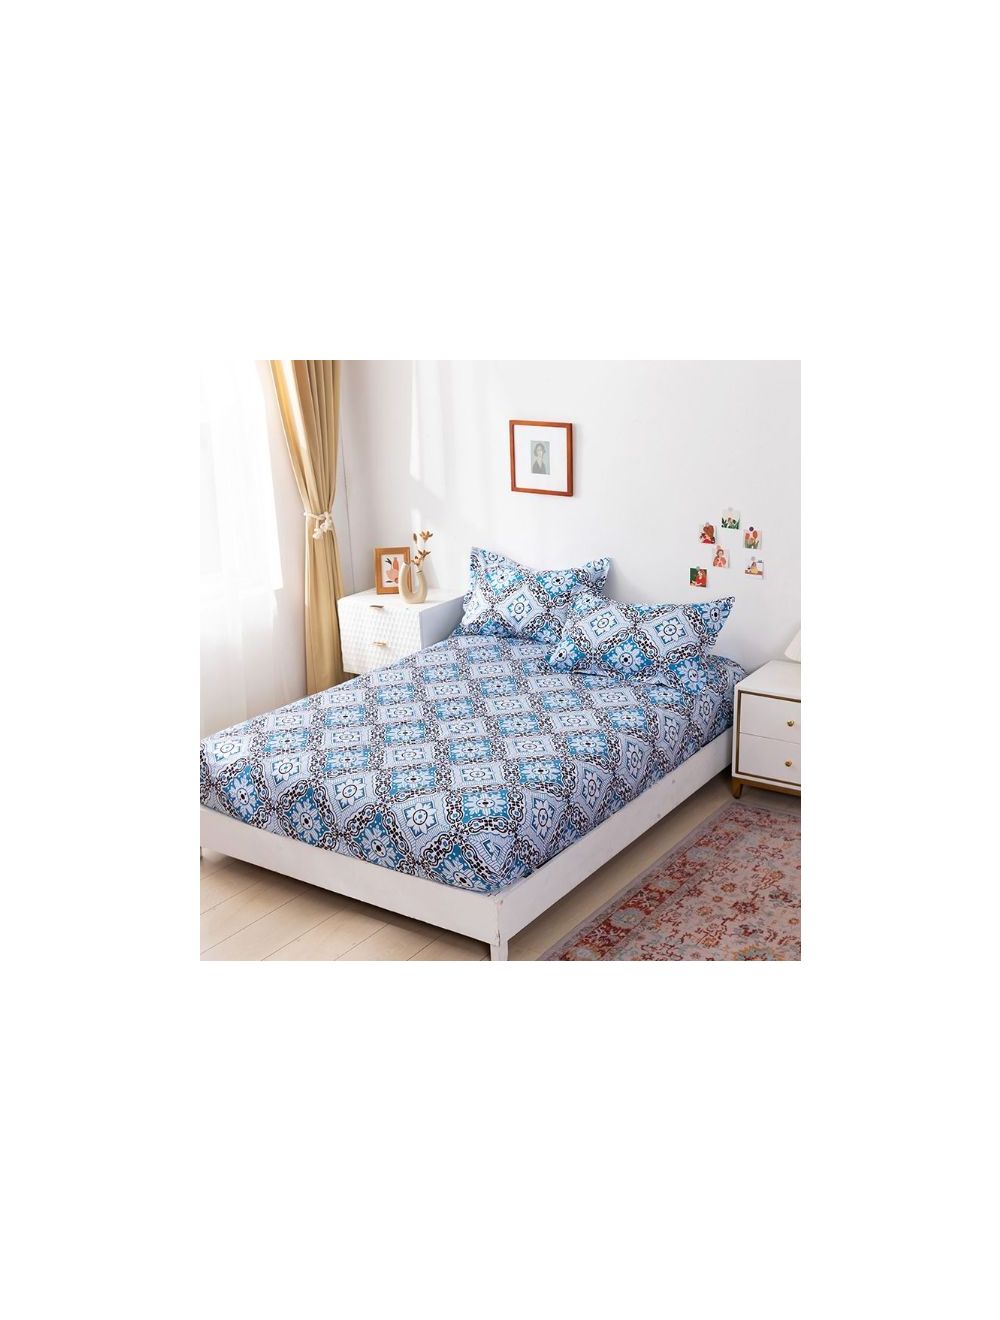 RISHAHOME 3-Piece King Size Printed Fitted Sheet Set|1 Fitted Sheet + 2 Pillow Cases|Microfibre|Oxford Blue-OXFBS0001